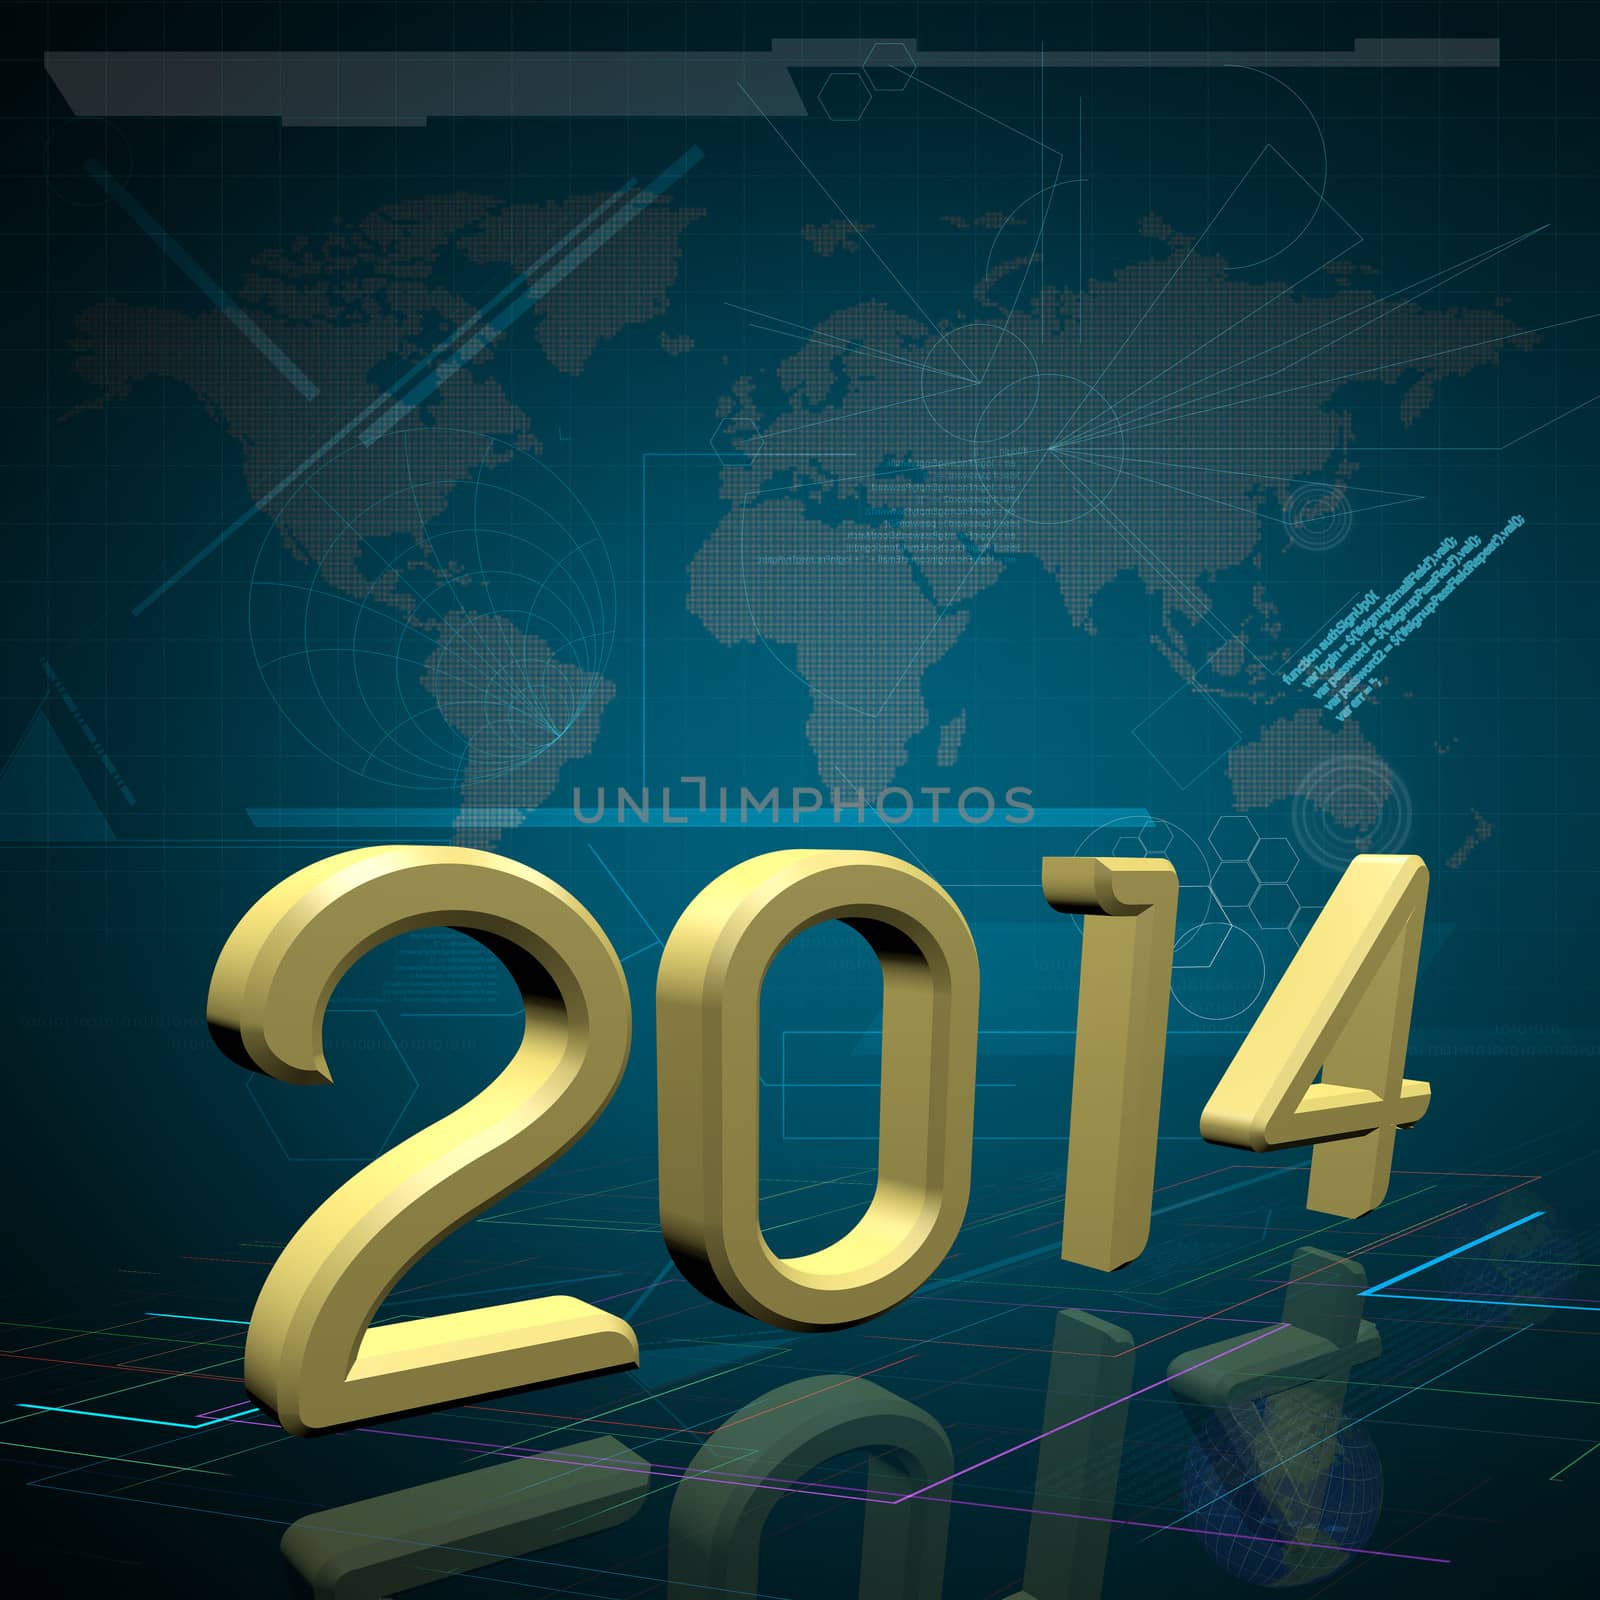 The Year 2014 by thampapon